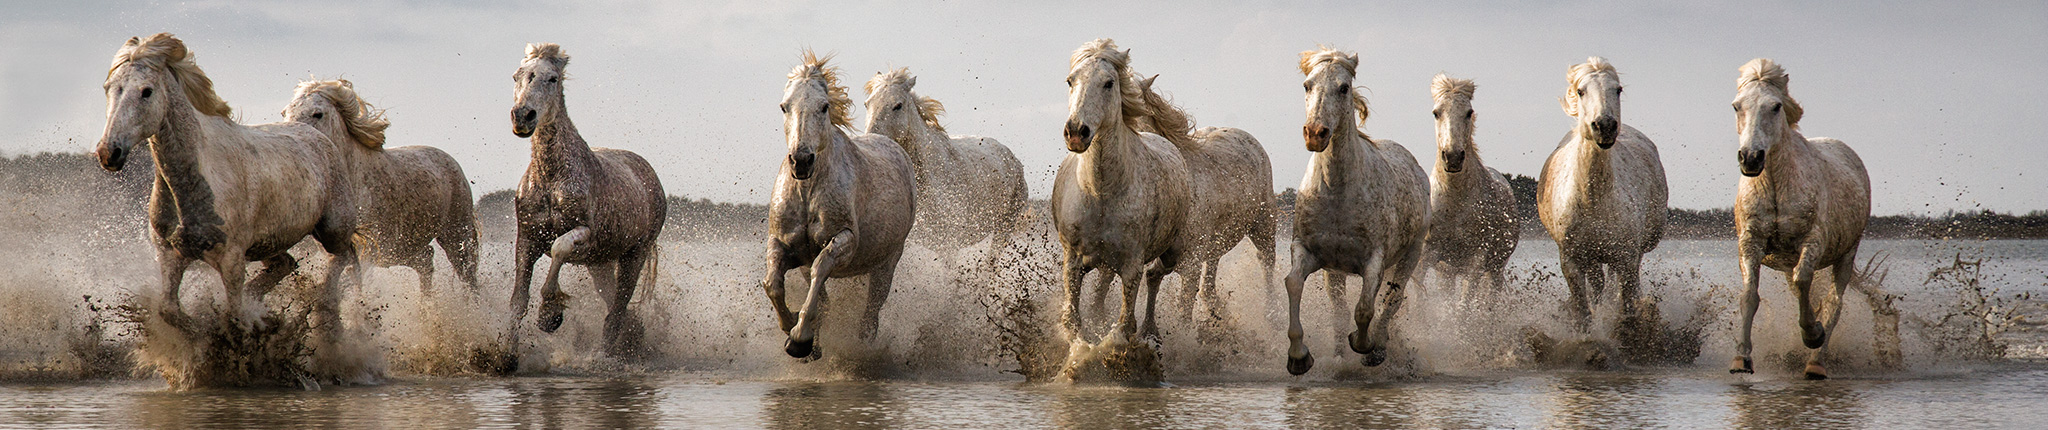 white horses of the camargue, france